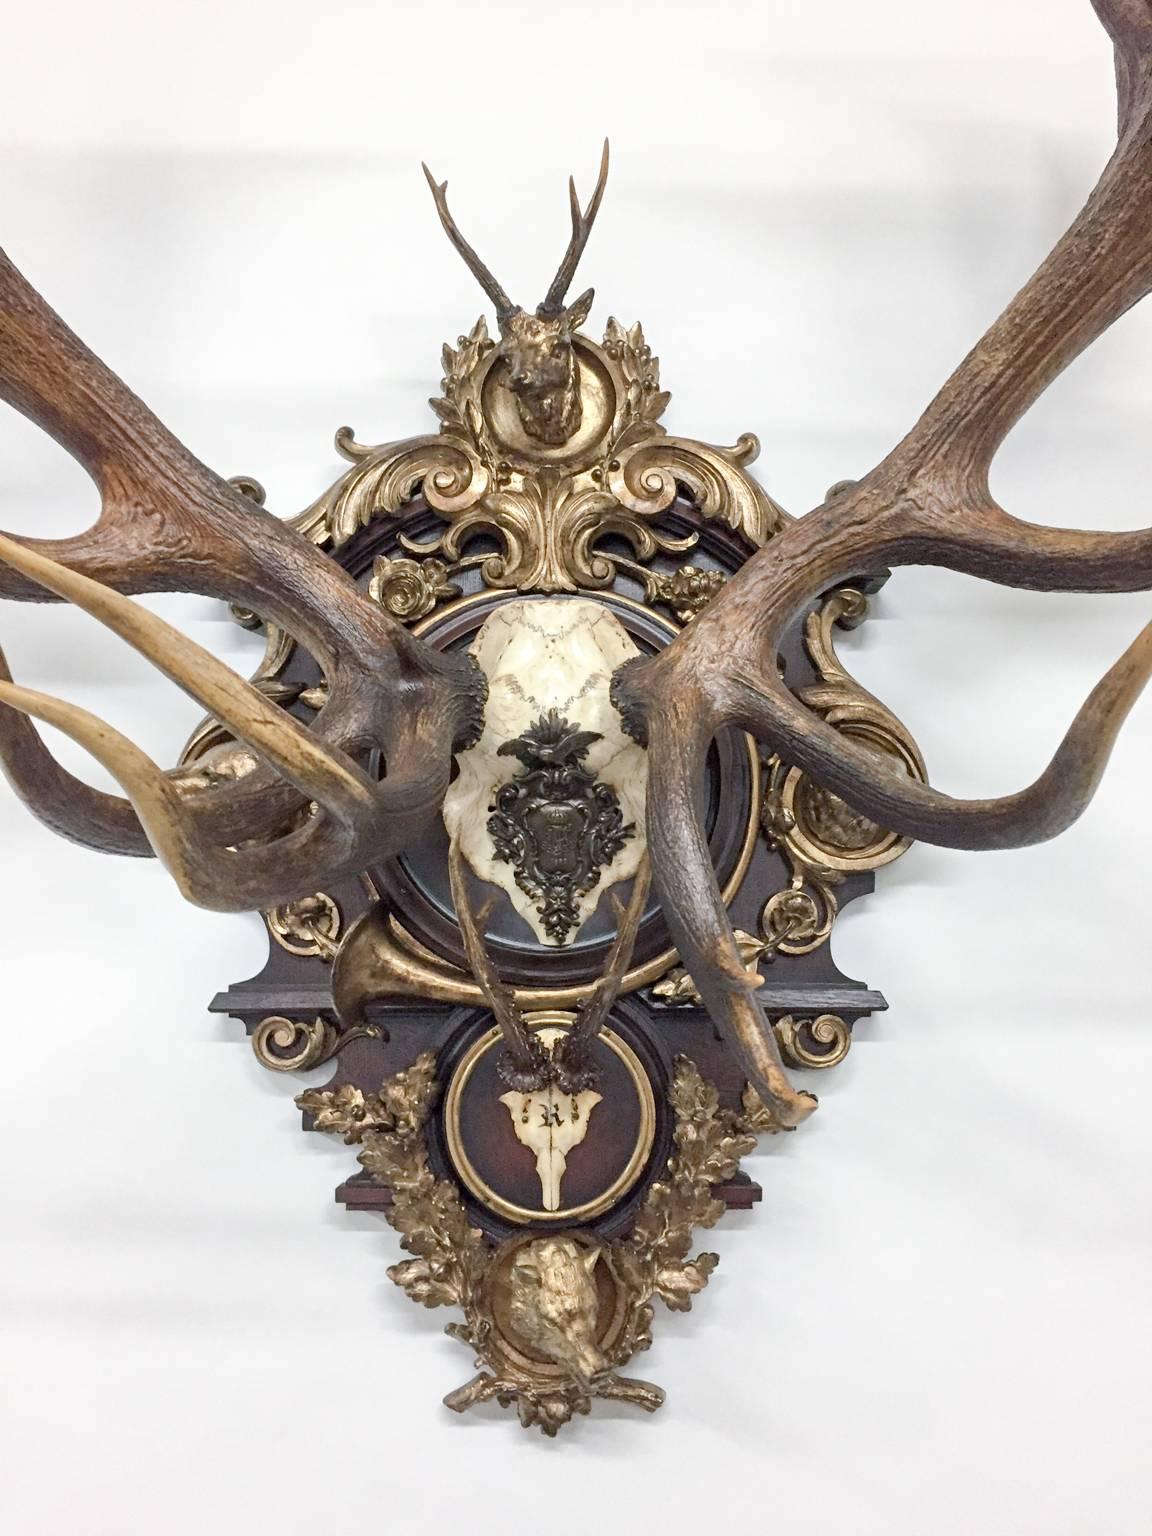 This extraordinary Red Stag is quite large making it a tremendous statement piece measuring 59 inches tall, 52 inches wide and 31 inches depth. Featured on the gilt plaque are four animals that surround the red stag all in gilt bronze: the Fox,